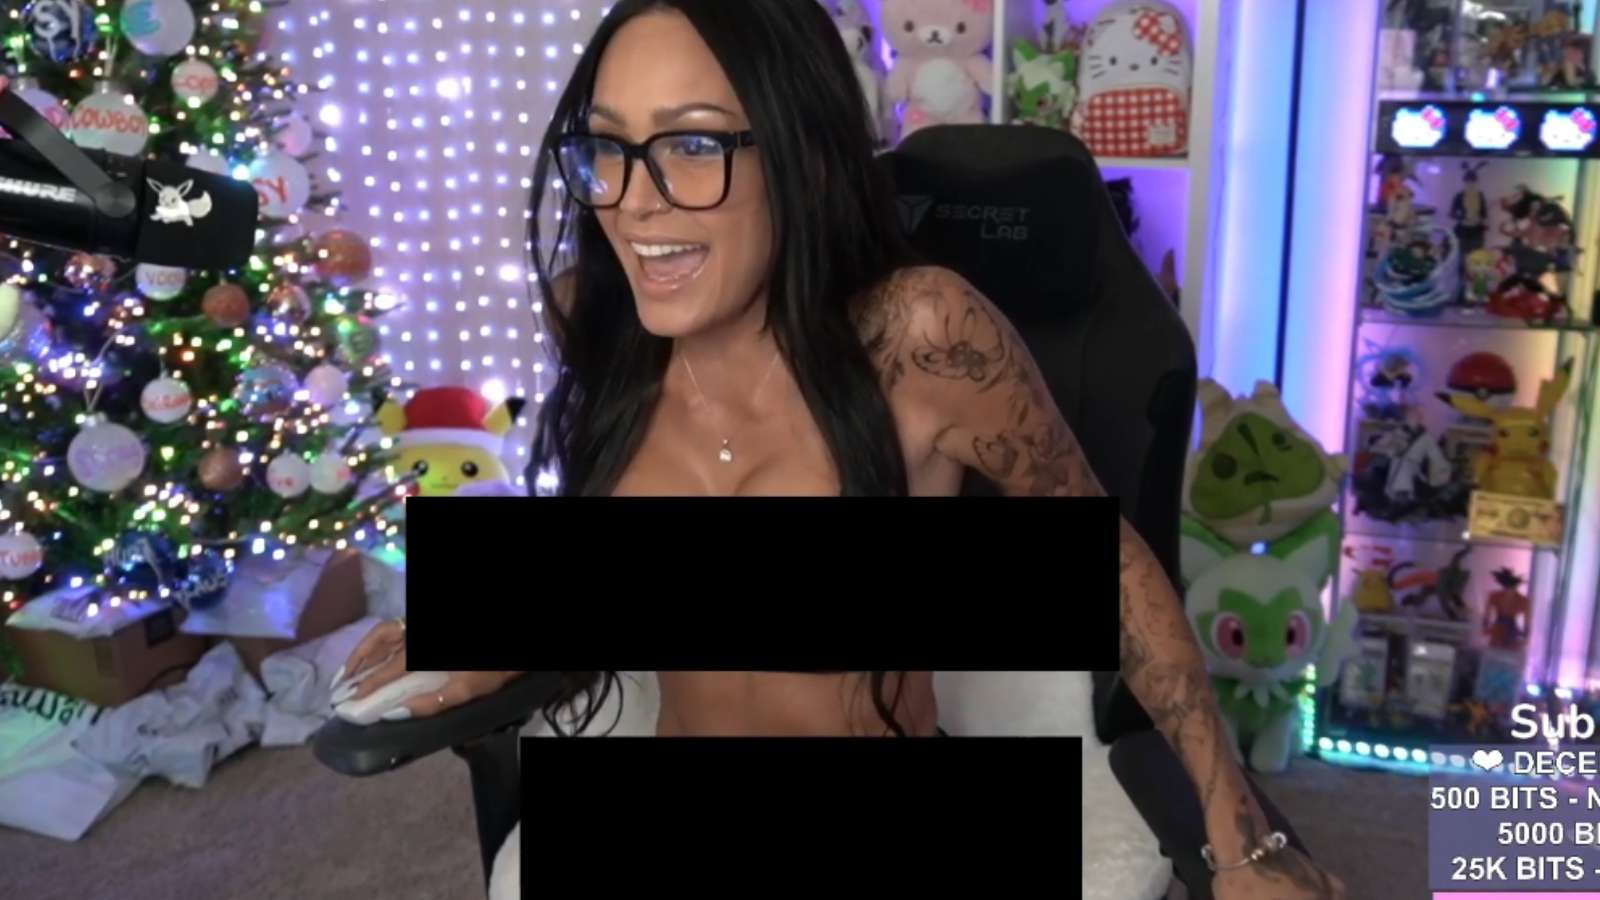 twitch streamer is nude except censor bars